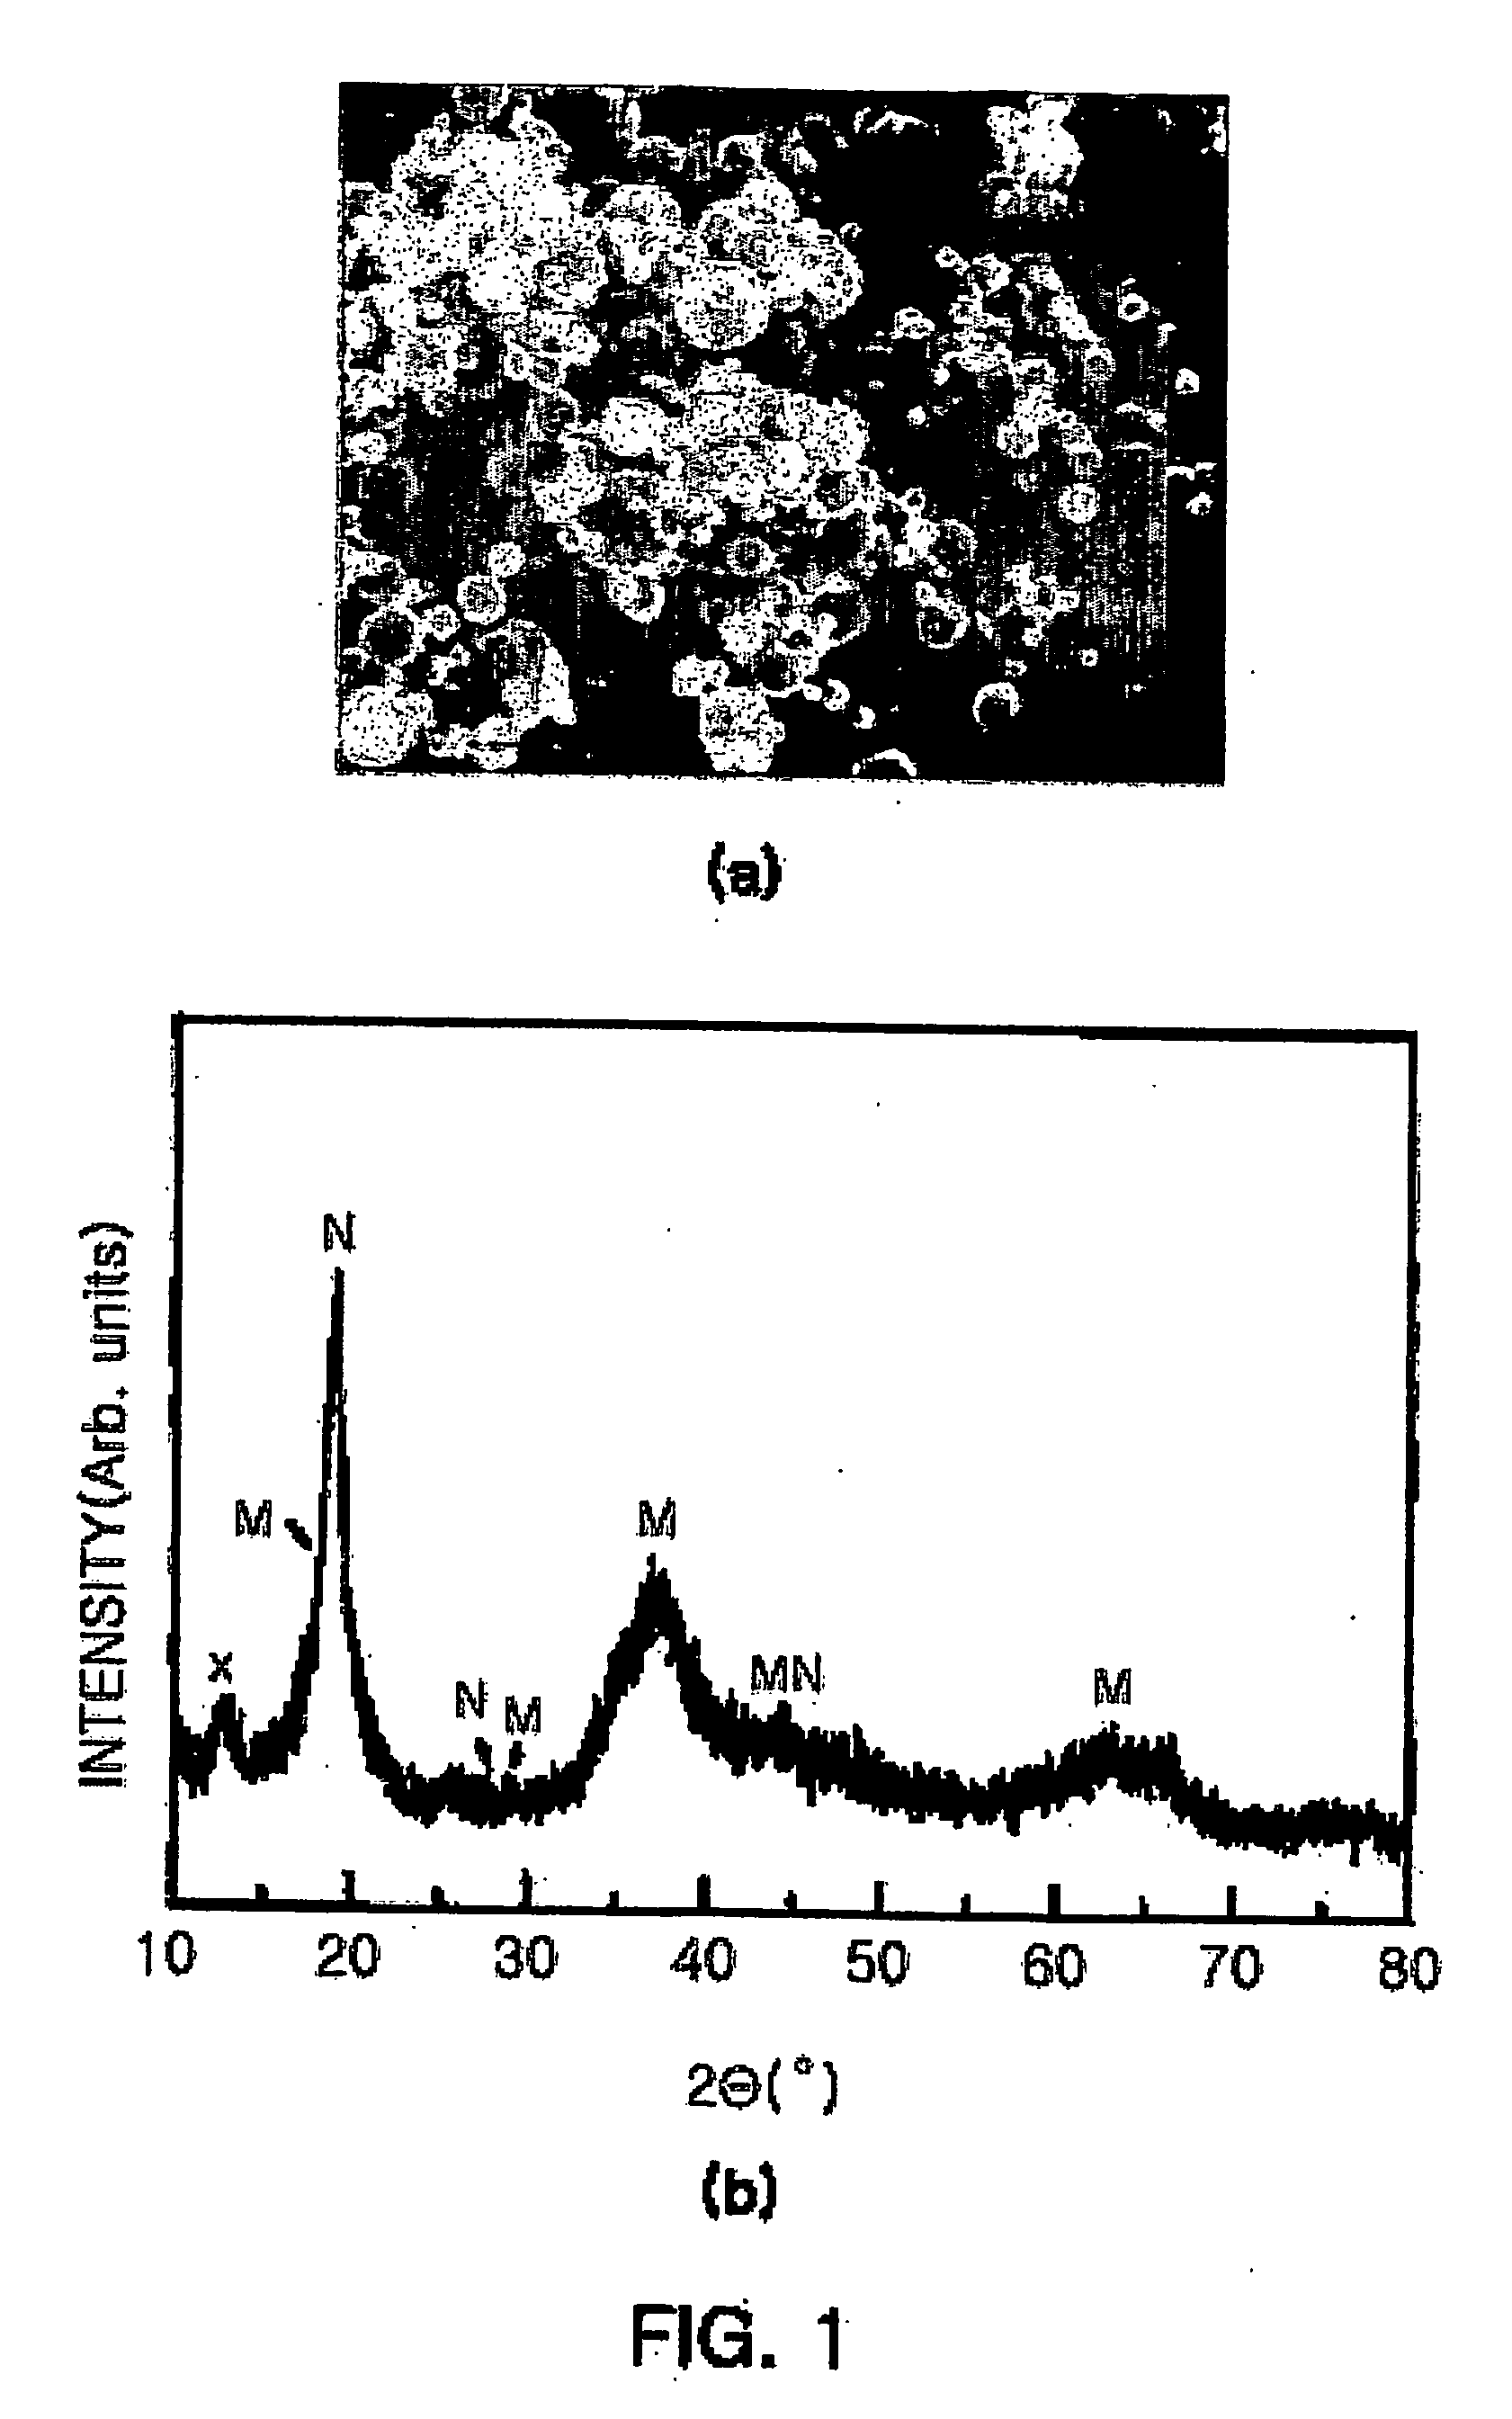 Method for producing lithium composite oxide for use as positive electrode active material for lithium secondary batteries